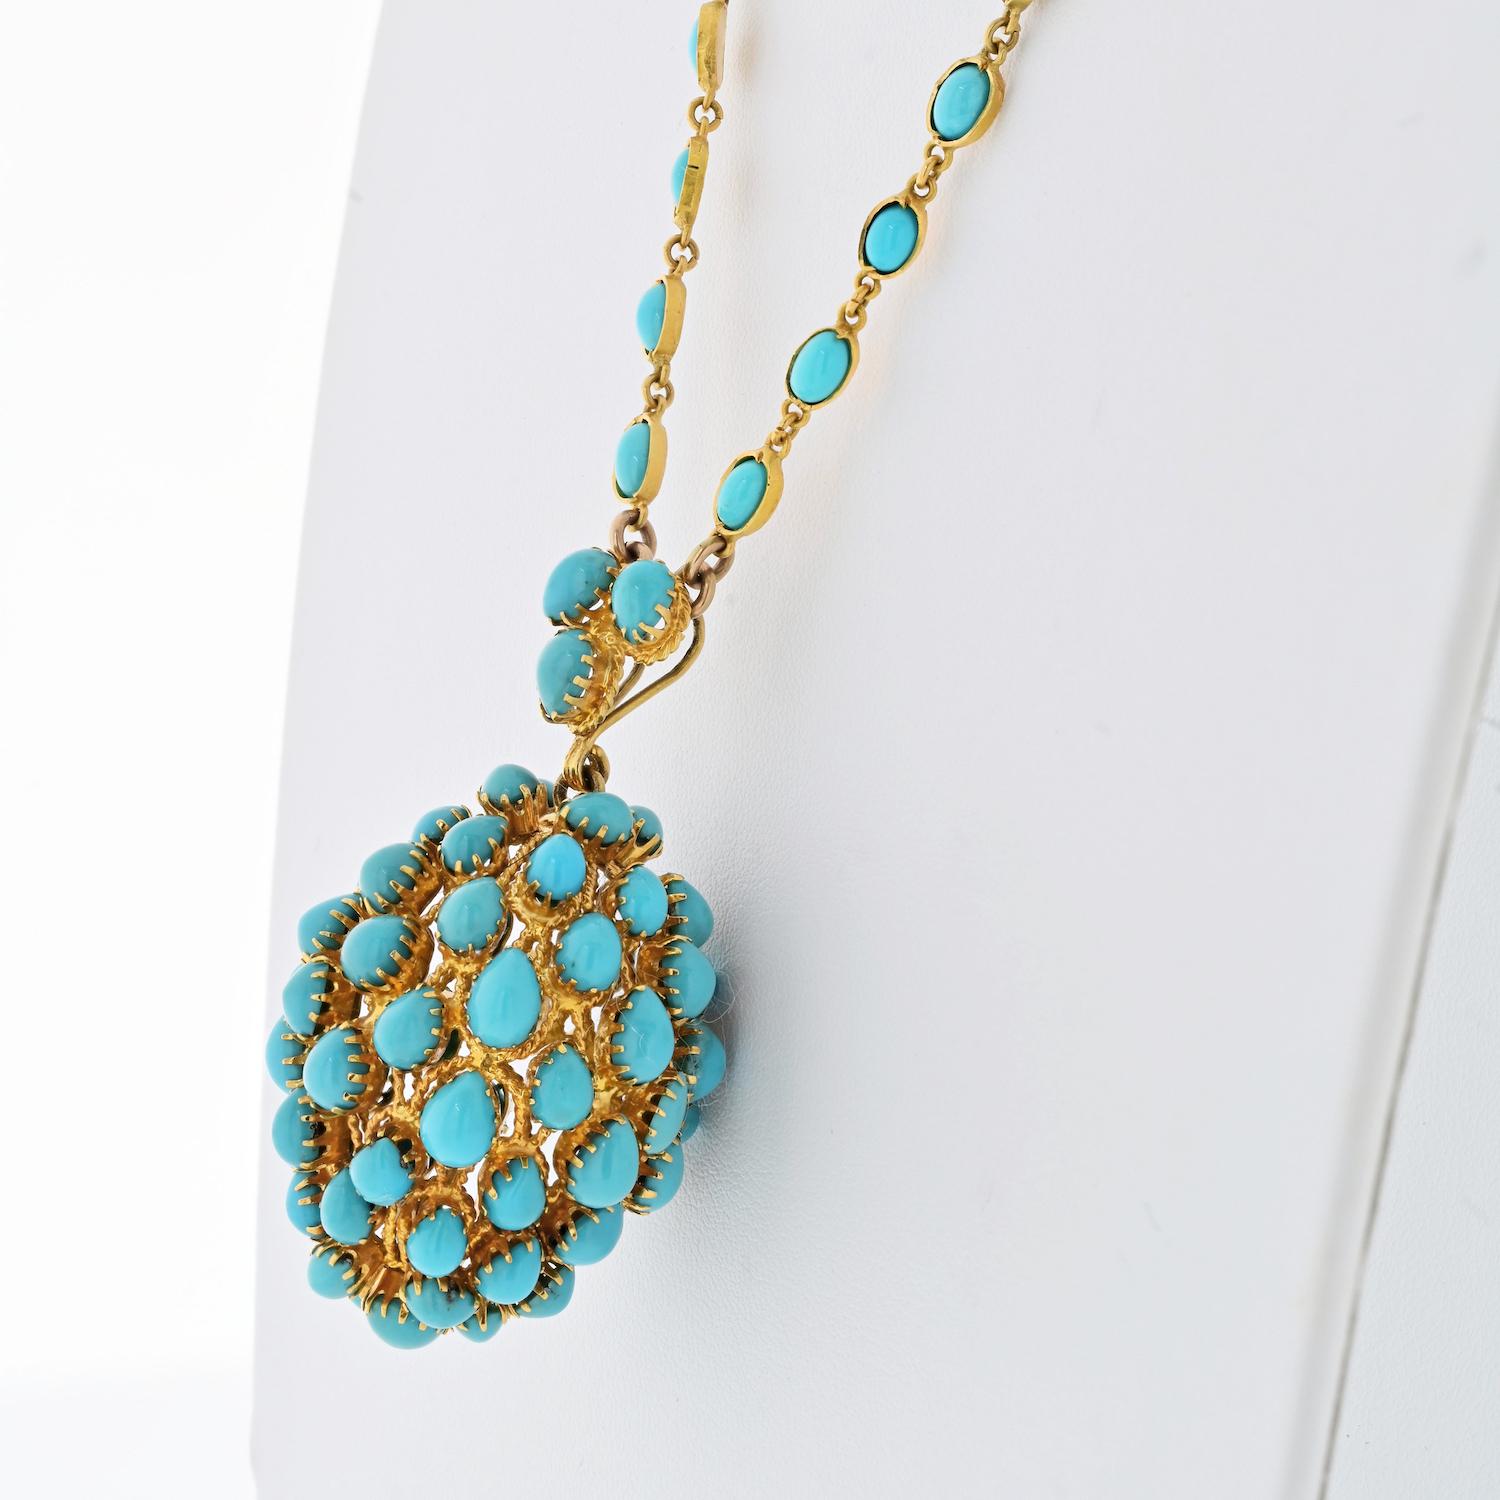 Modern 18K Yellow Gold Turquoise Acorn Pendant On A Chain Necklace For Sale